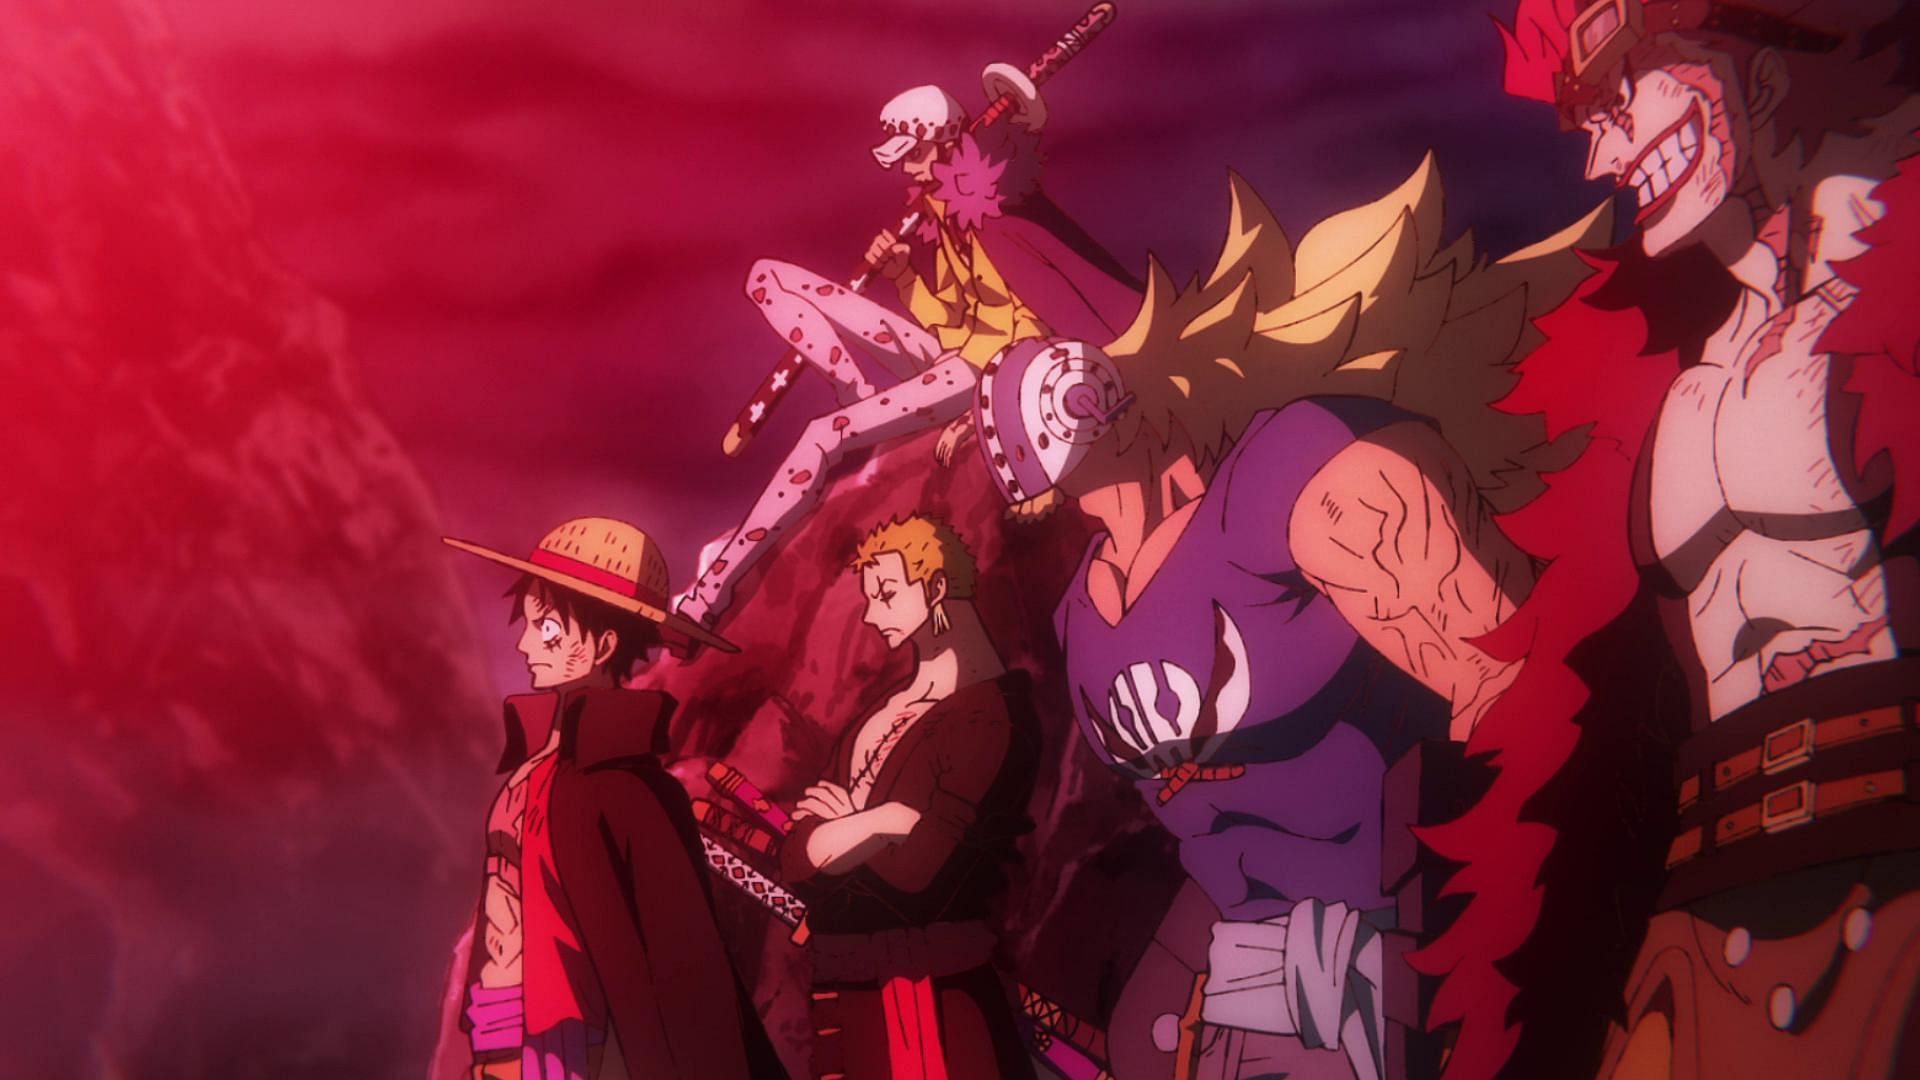 Which episode is One Piece : Stampede? I cannot find the episode